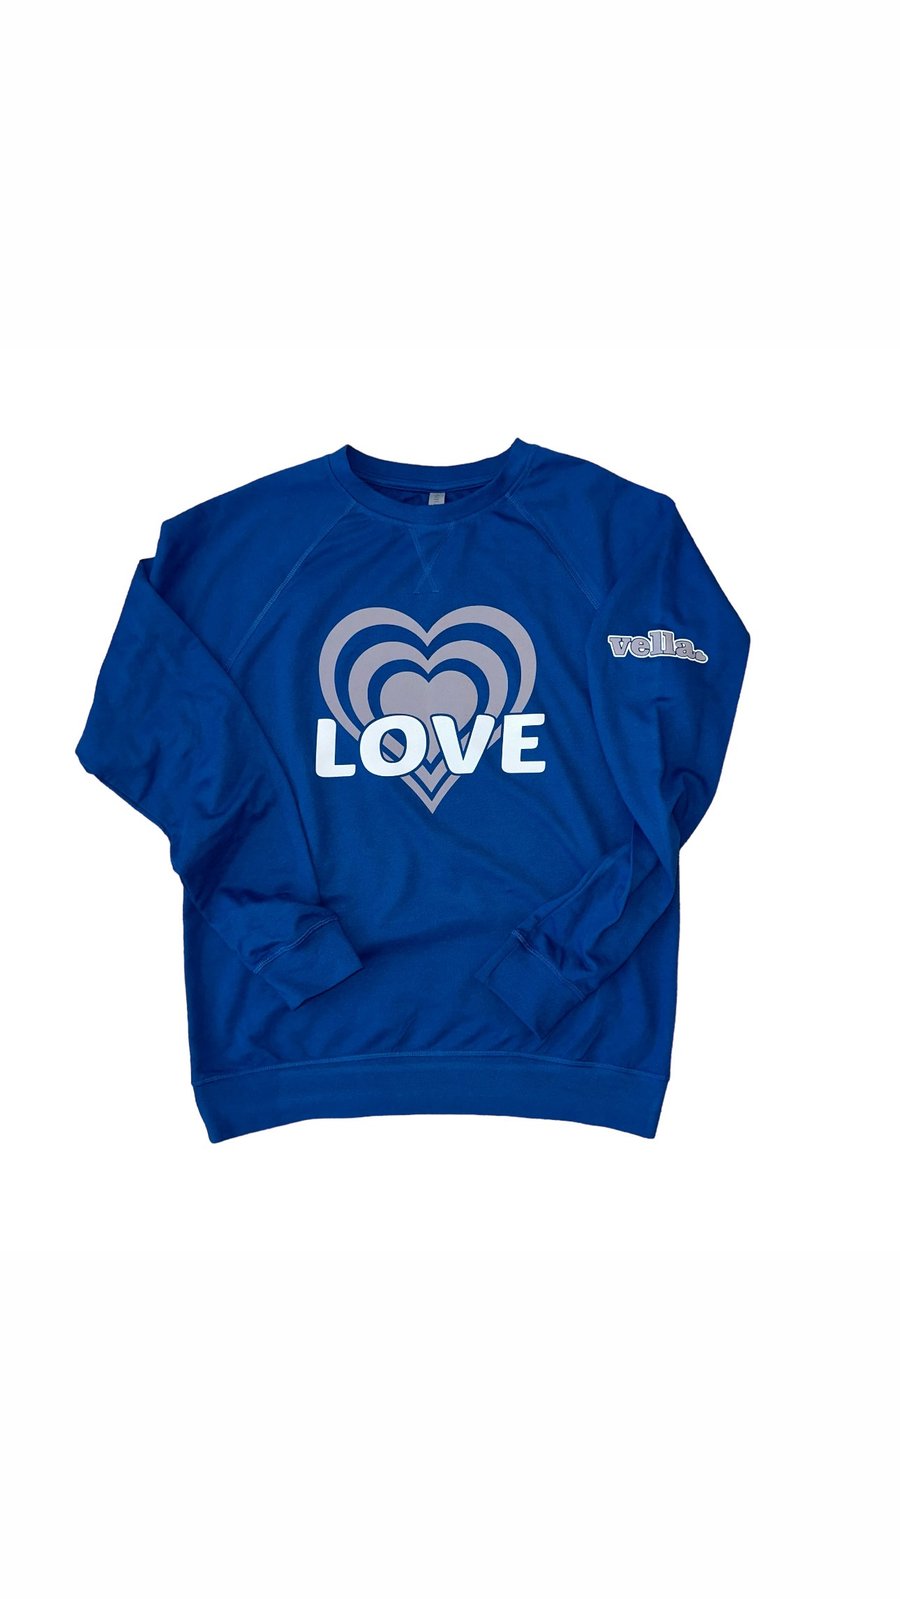 Image of Cool Blue “LOVE” soft Terry shirt